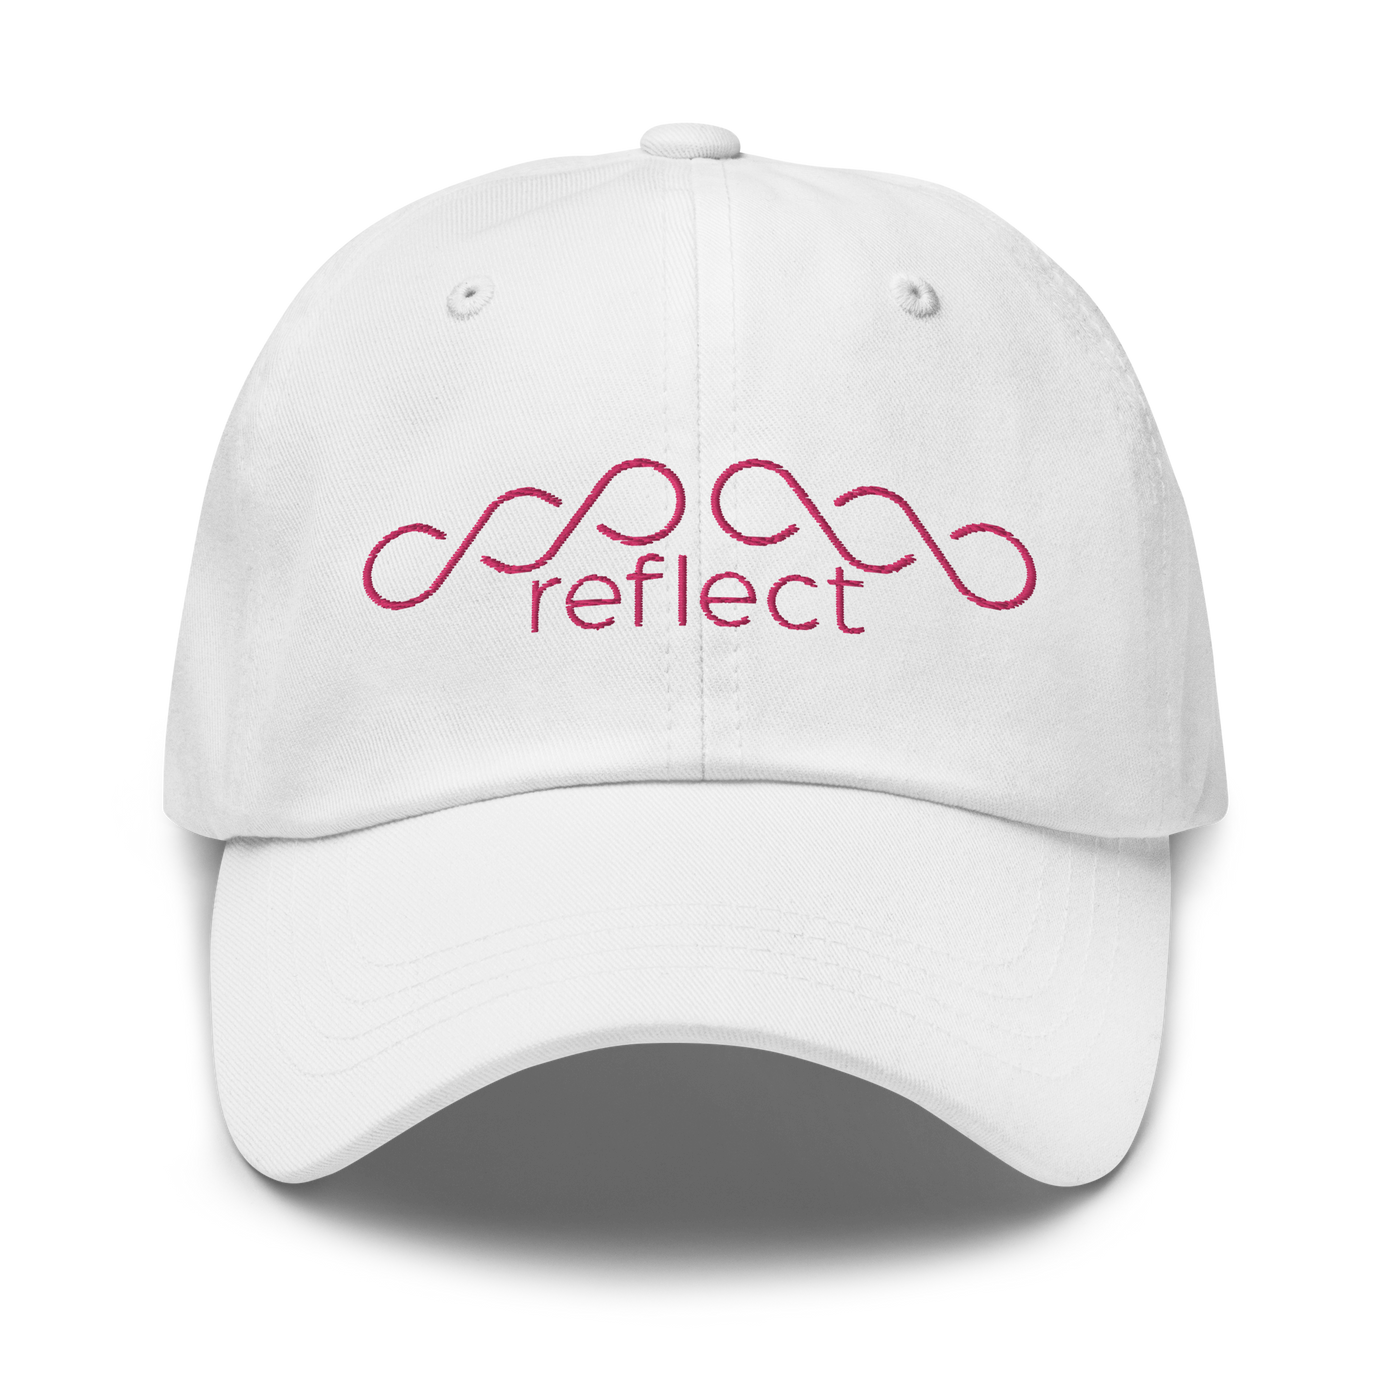 Original Reflection Relaxed Hat